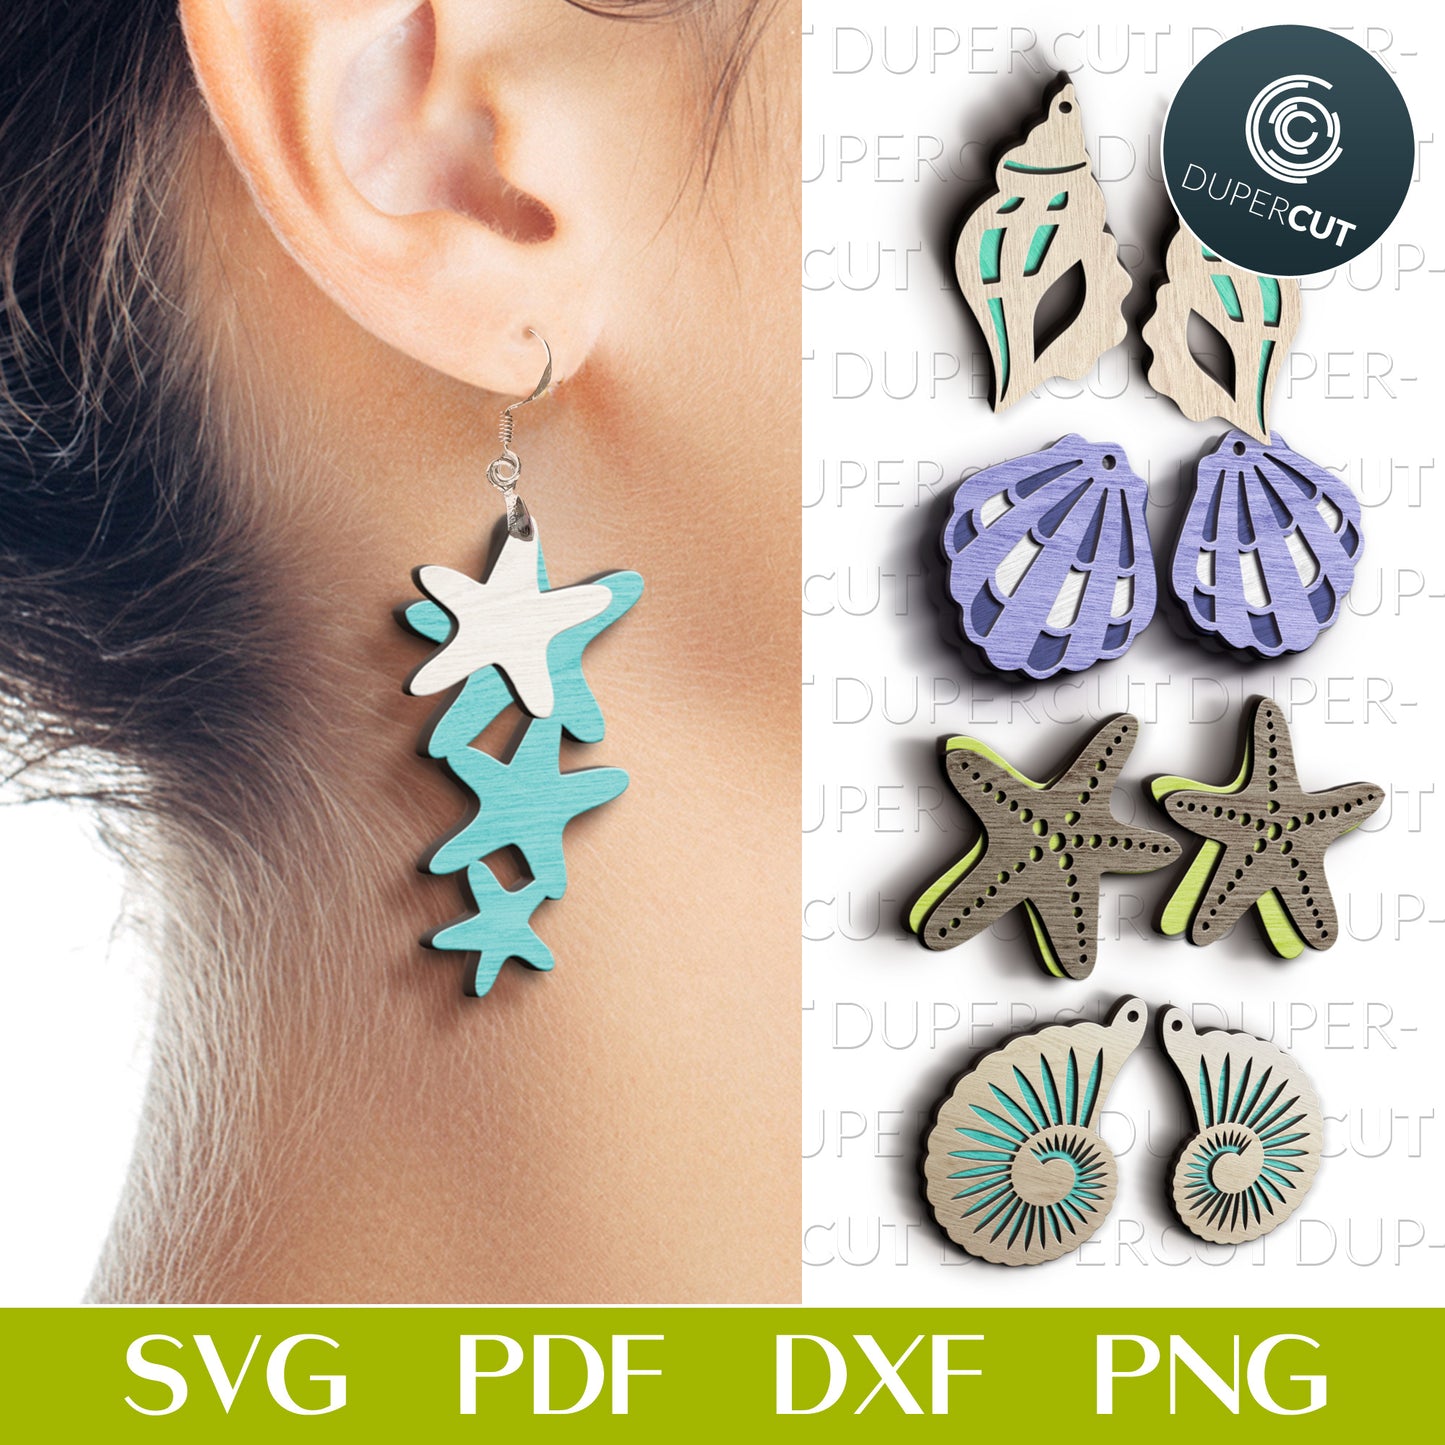 Layered seashell earrings, SVG PDF DXF files for laser cutting on wood, leather, acrylic. Use with Glowforge, Cricut, Silhouette cameo.